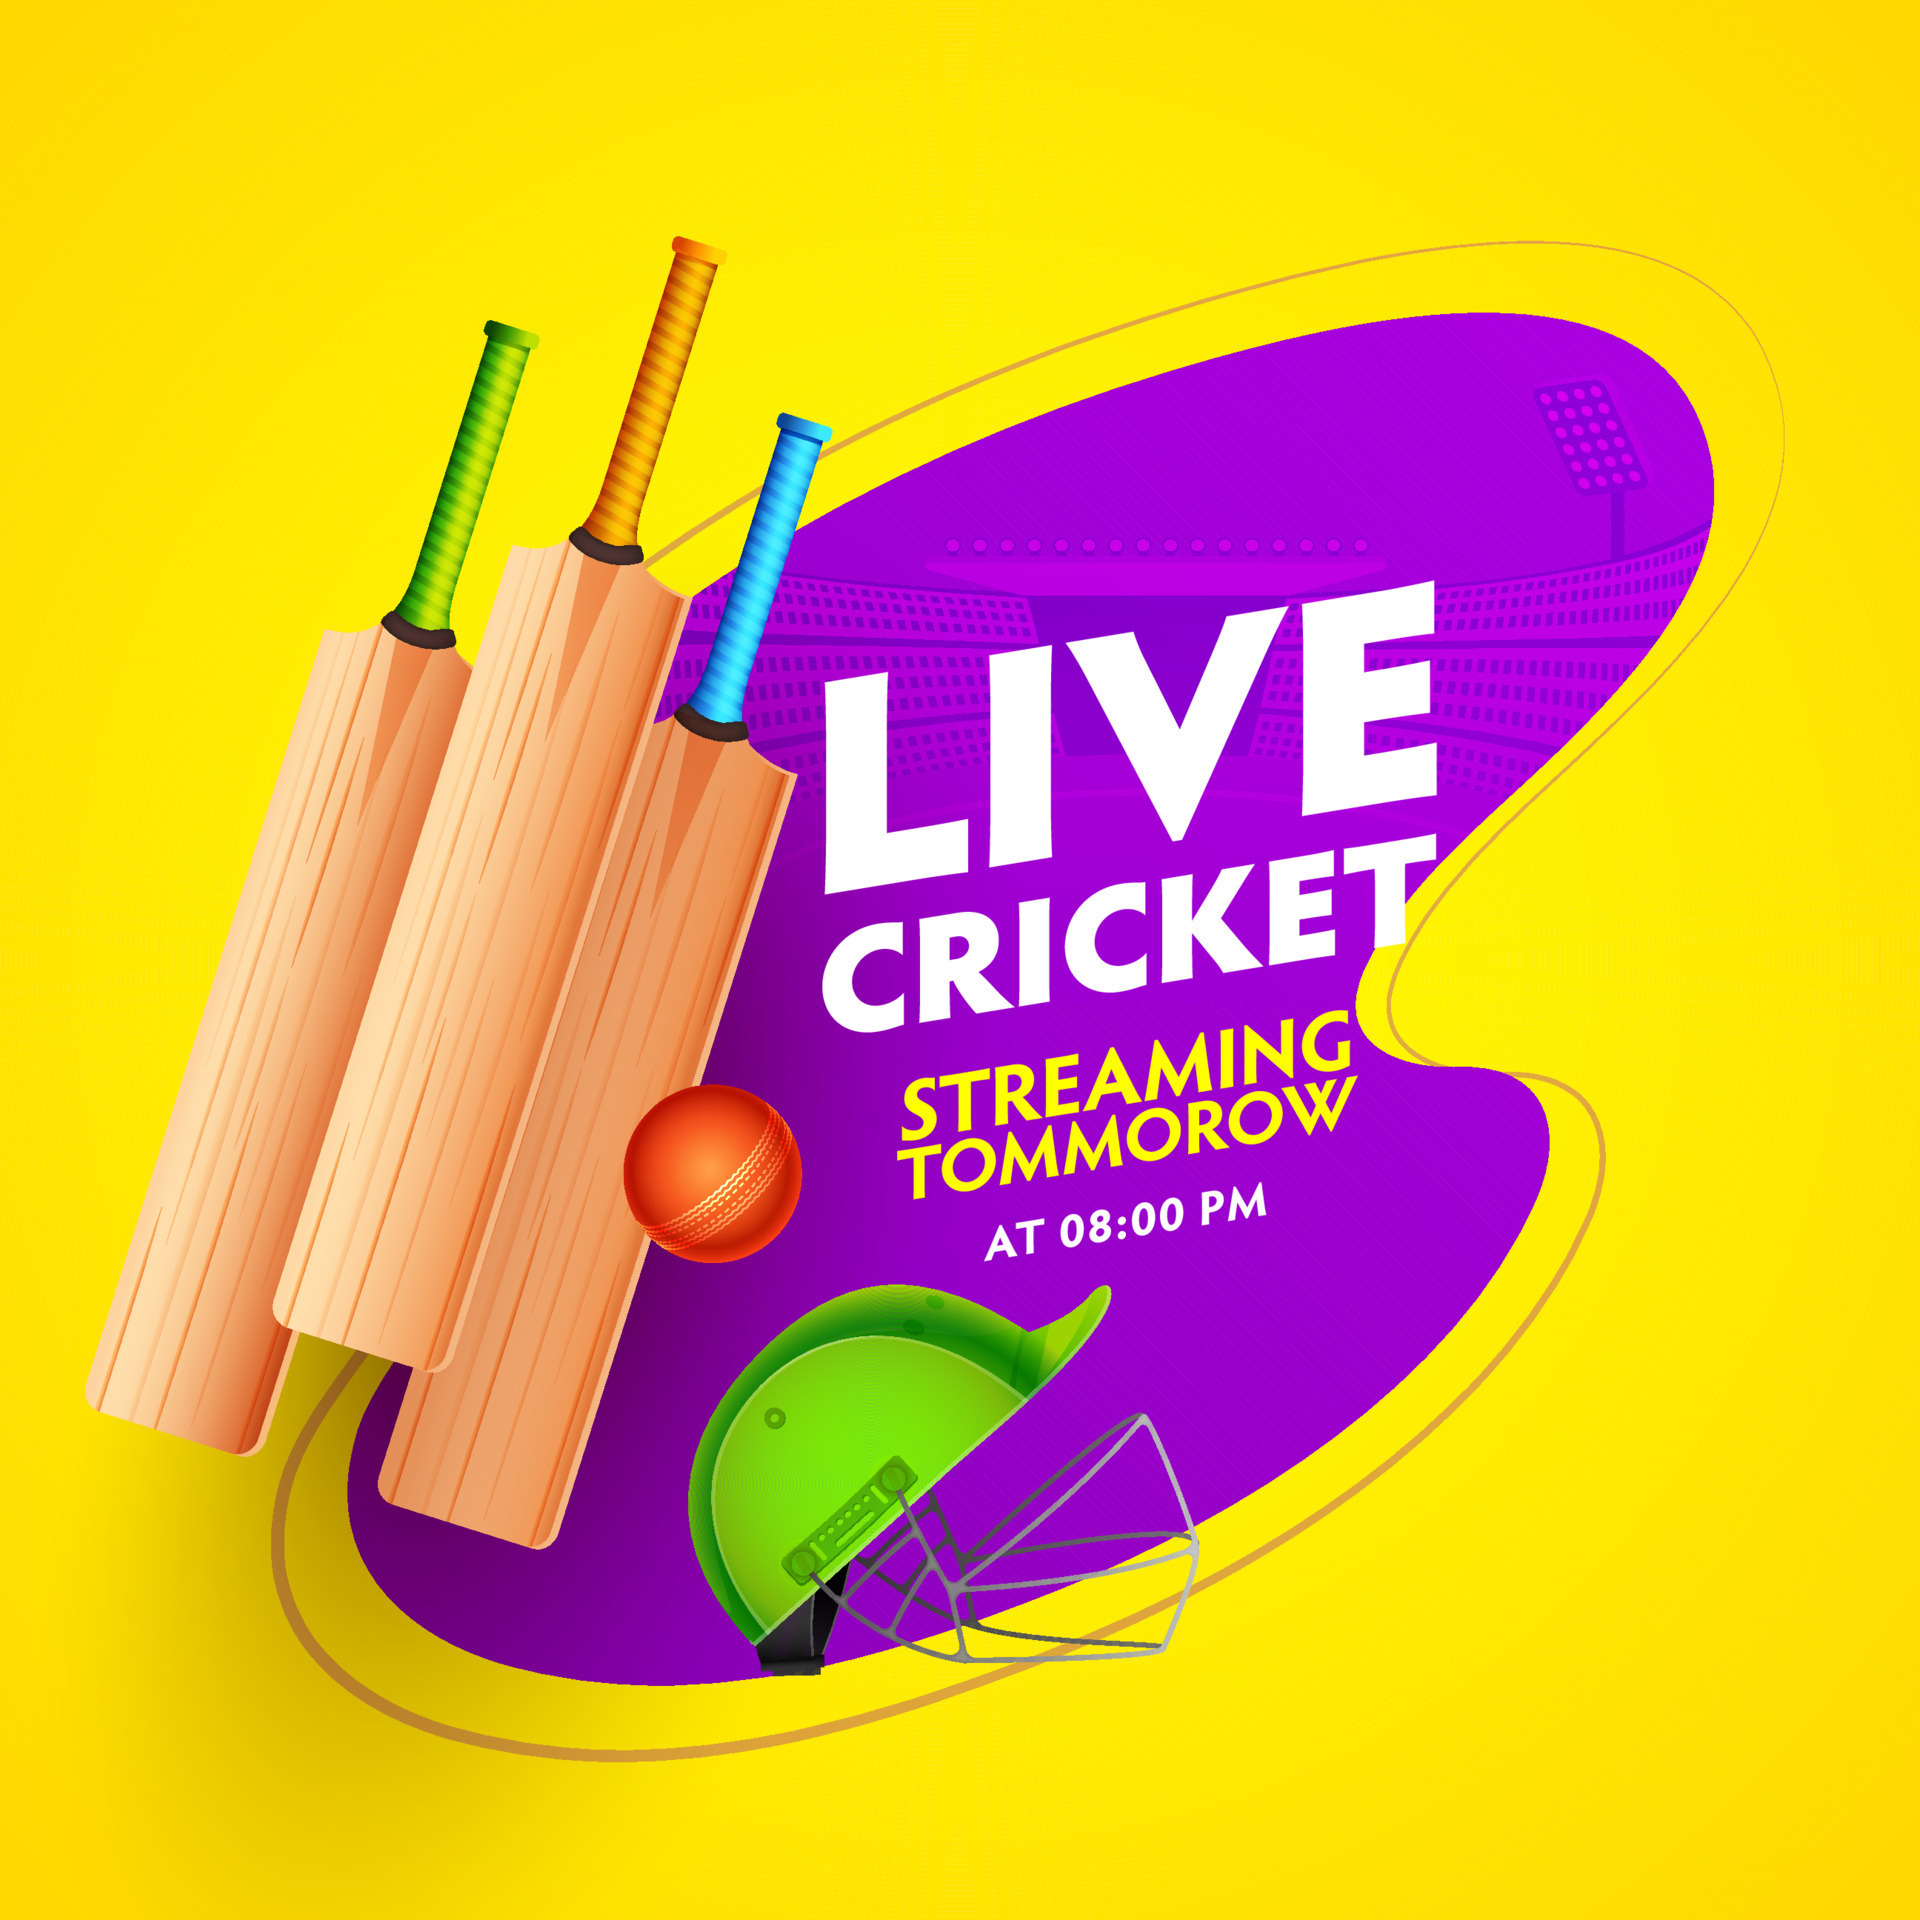 womens world cup cricket live streaming free